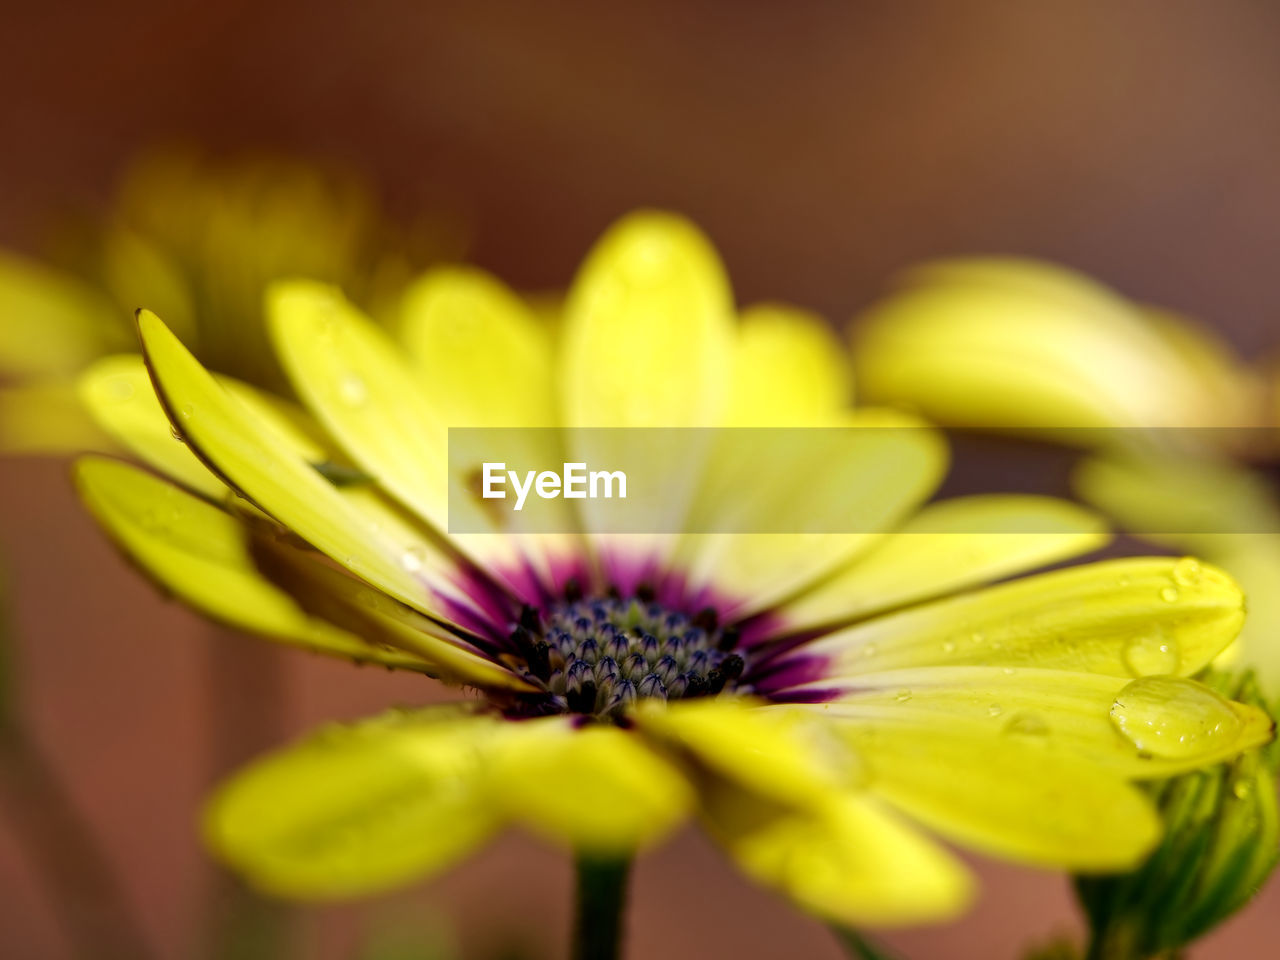 flower, flowering plant, yellow, freshness, plant, beauty in nature, close-up, macro photography, flower head, fragility, petal, inflorescence, growth, nature, daisy, selective focus, green, no people, wildflower, blossom, pollen, focus on foreground, plant stem, outdoors, springtime, vibrant color